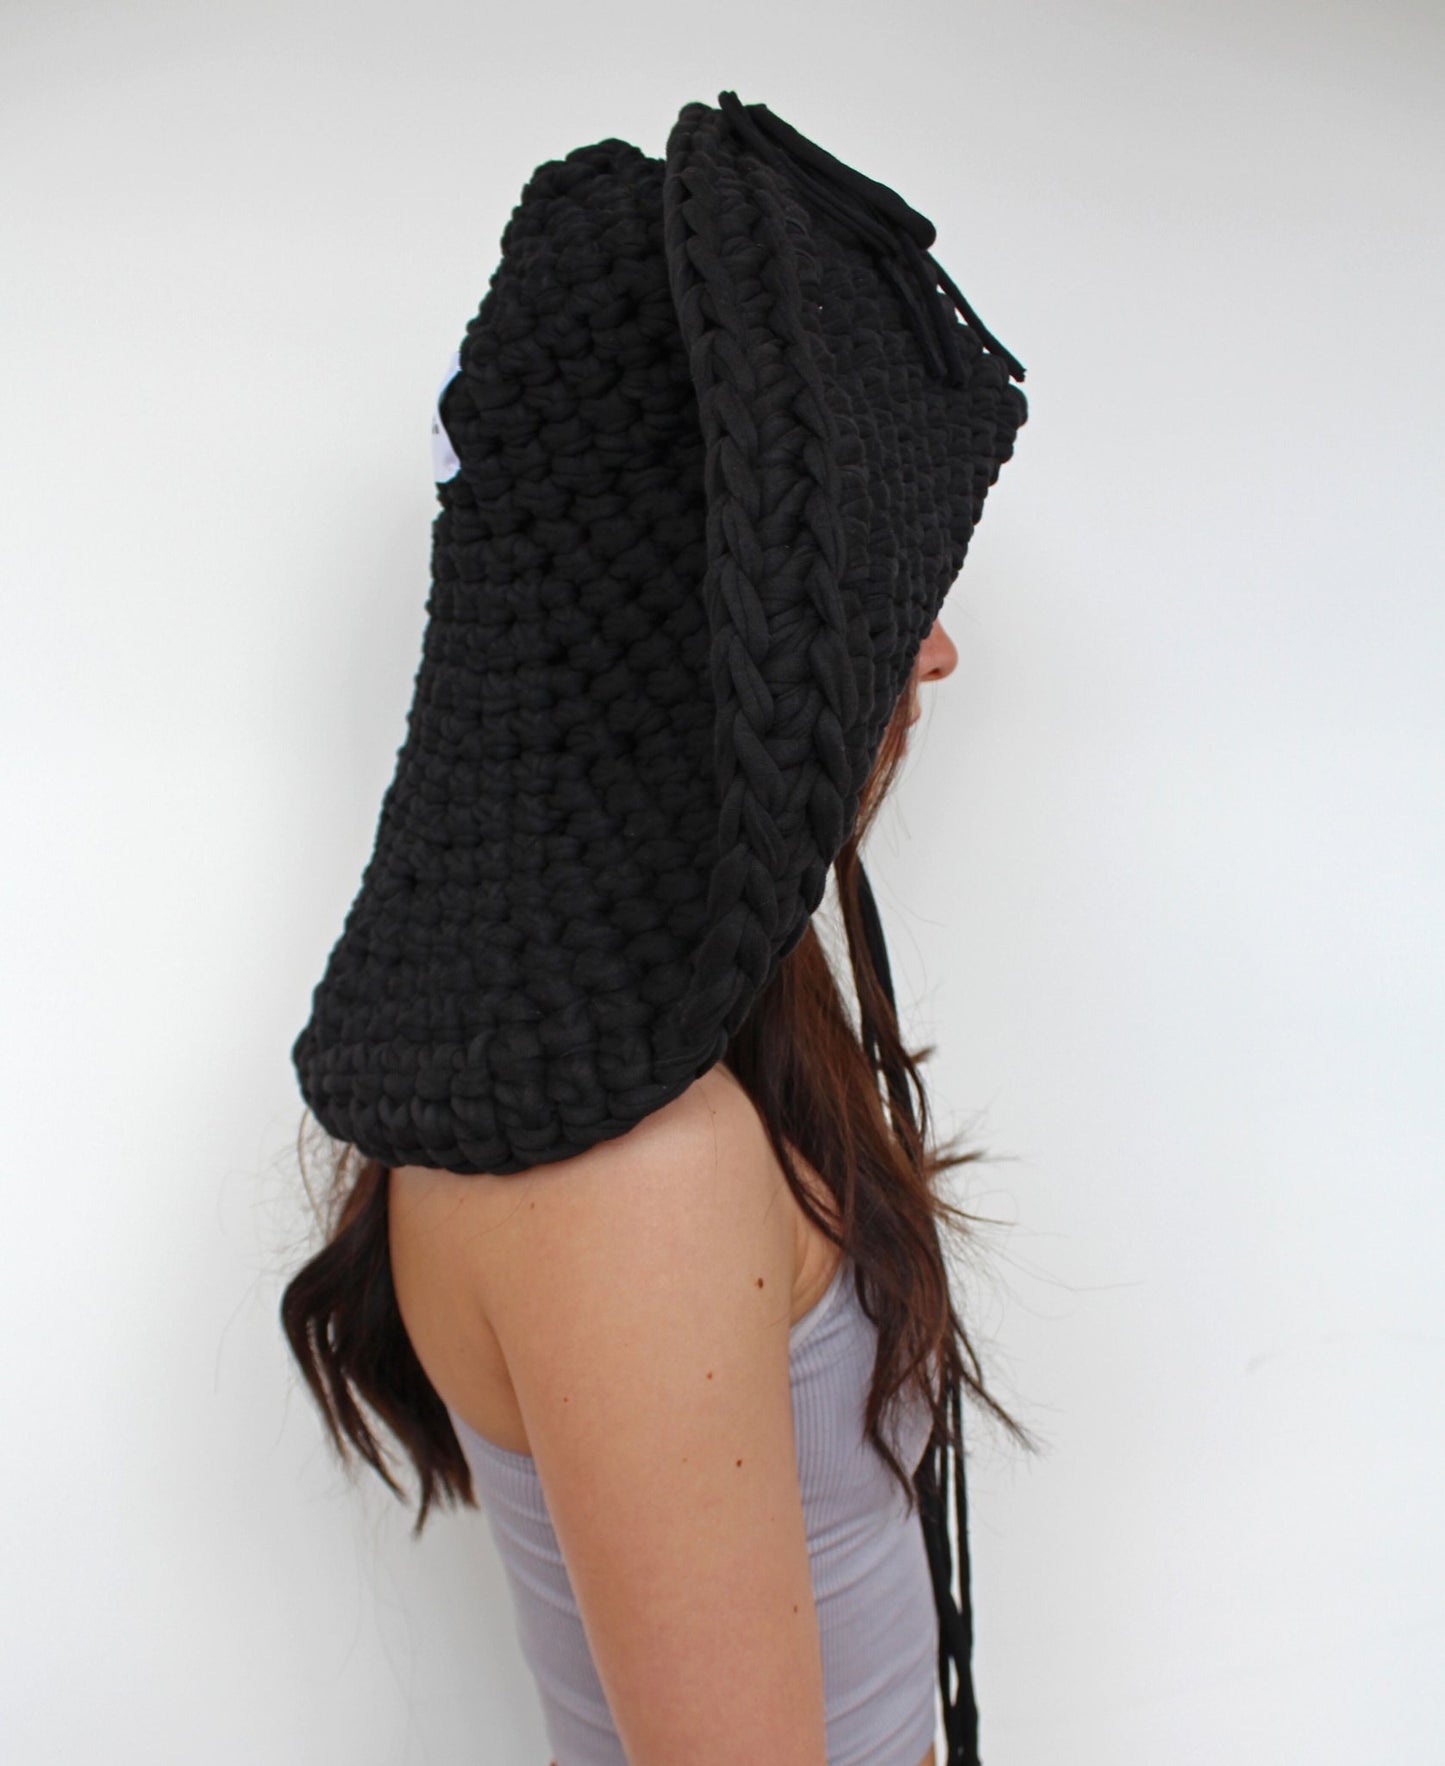 Black UFO Hat - Bazaare All Products